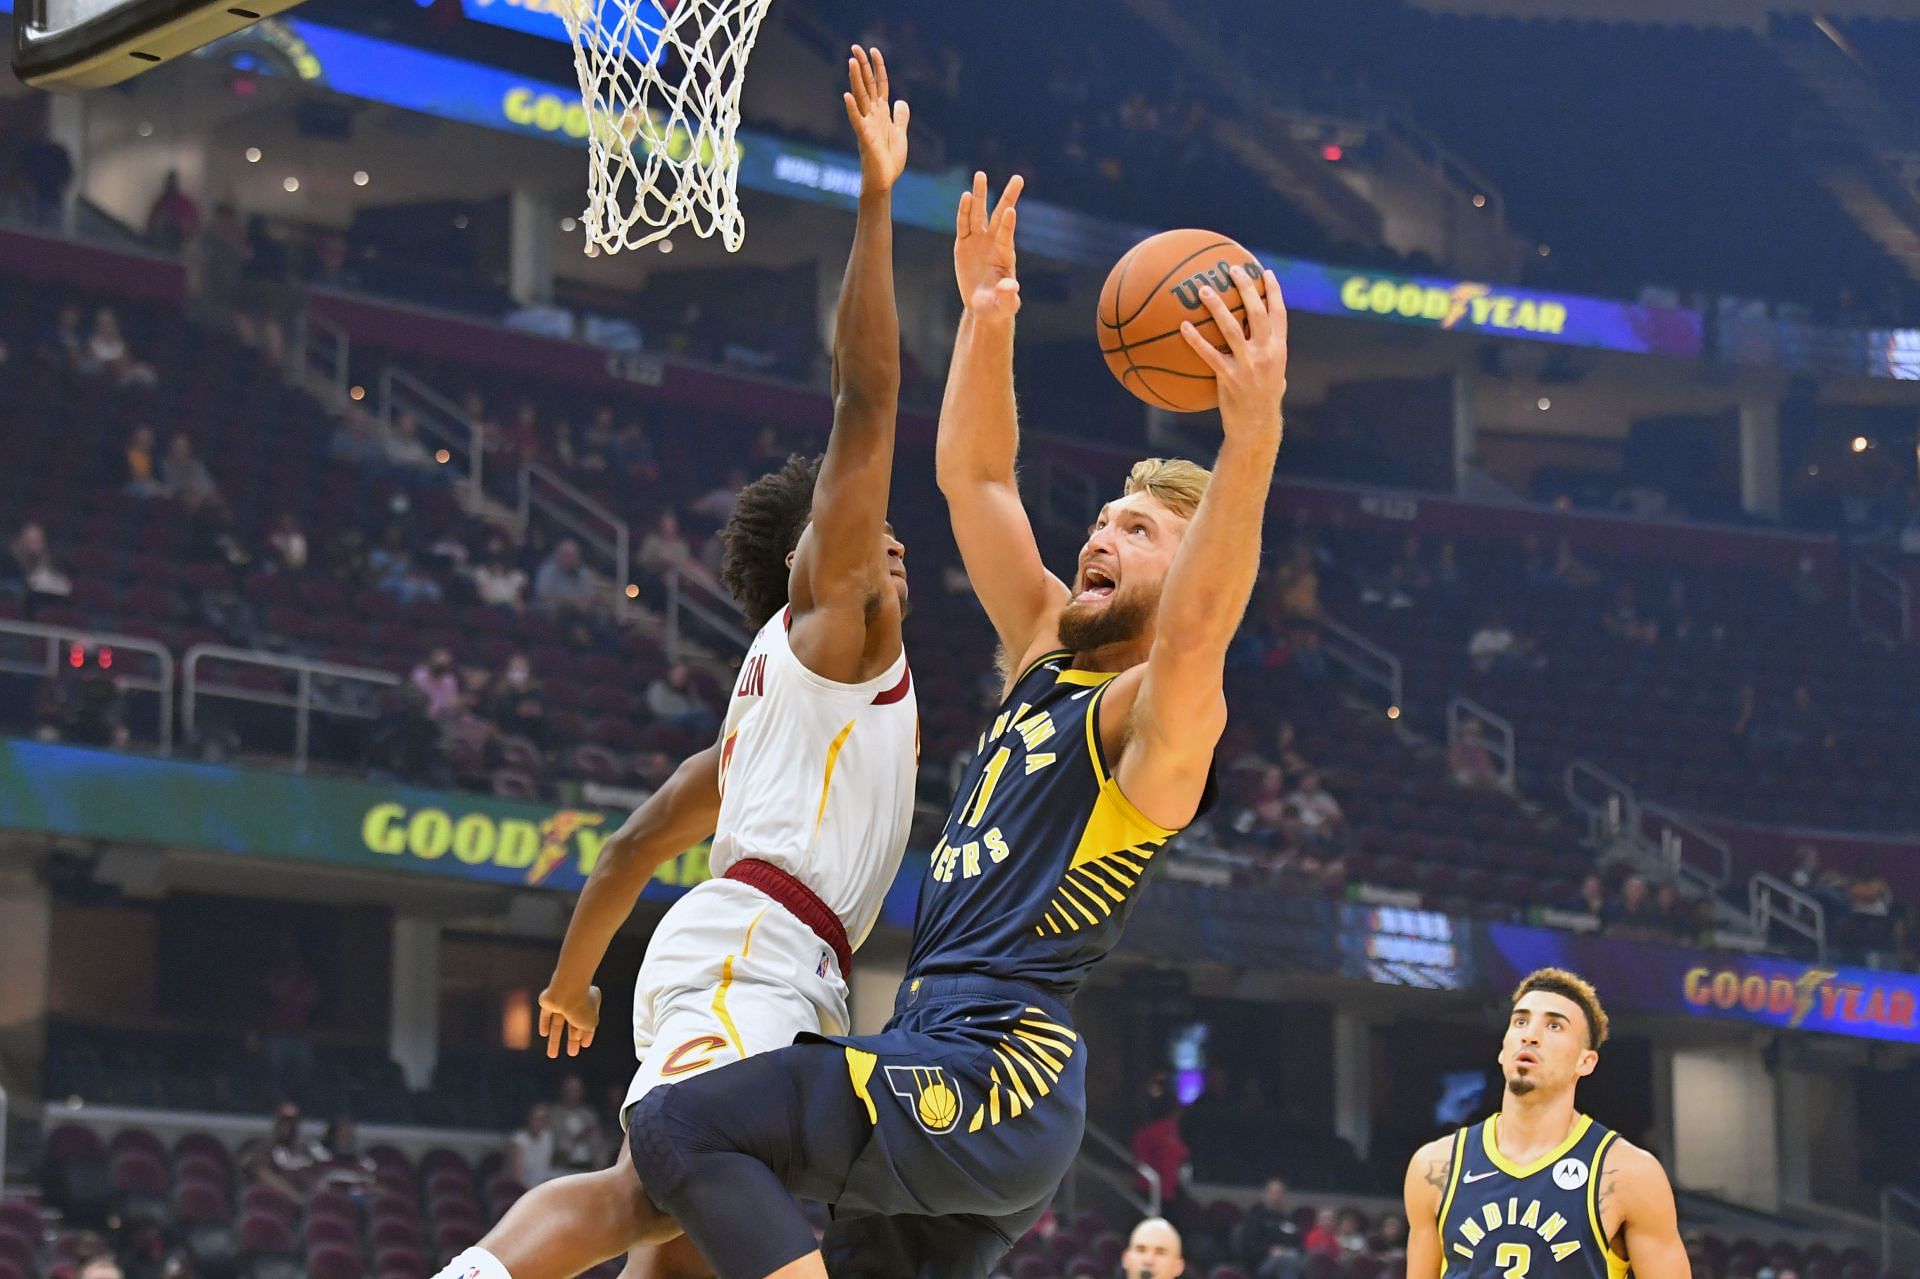 The Indiana Pacers registered two wins and two losses in their NBA preseason campaign